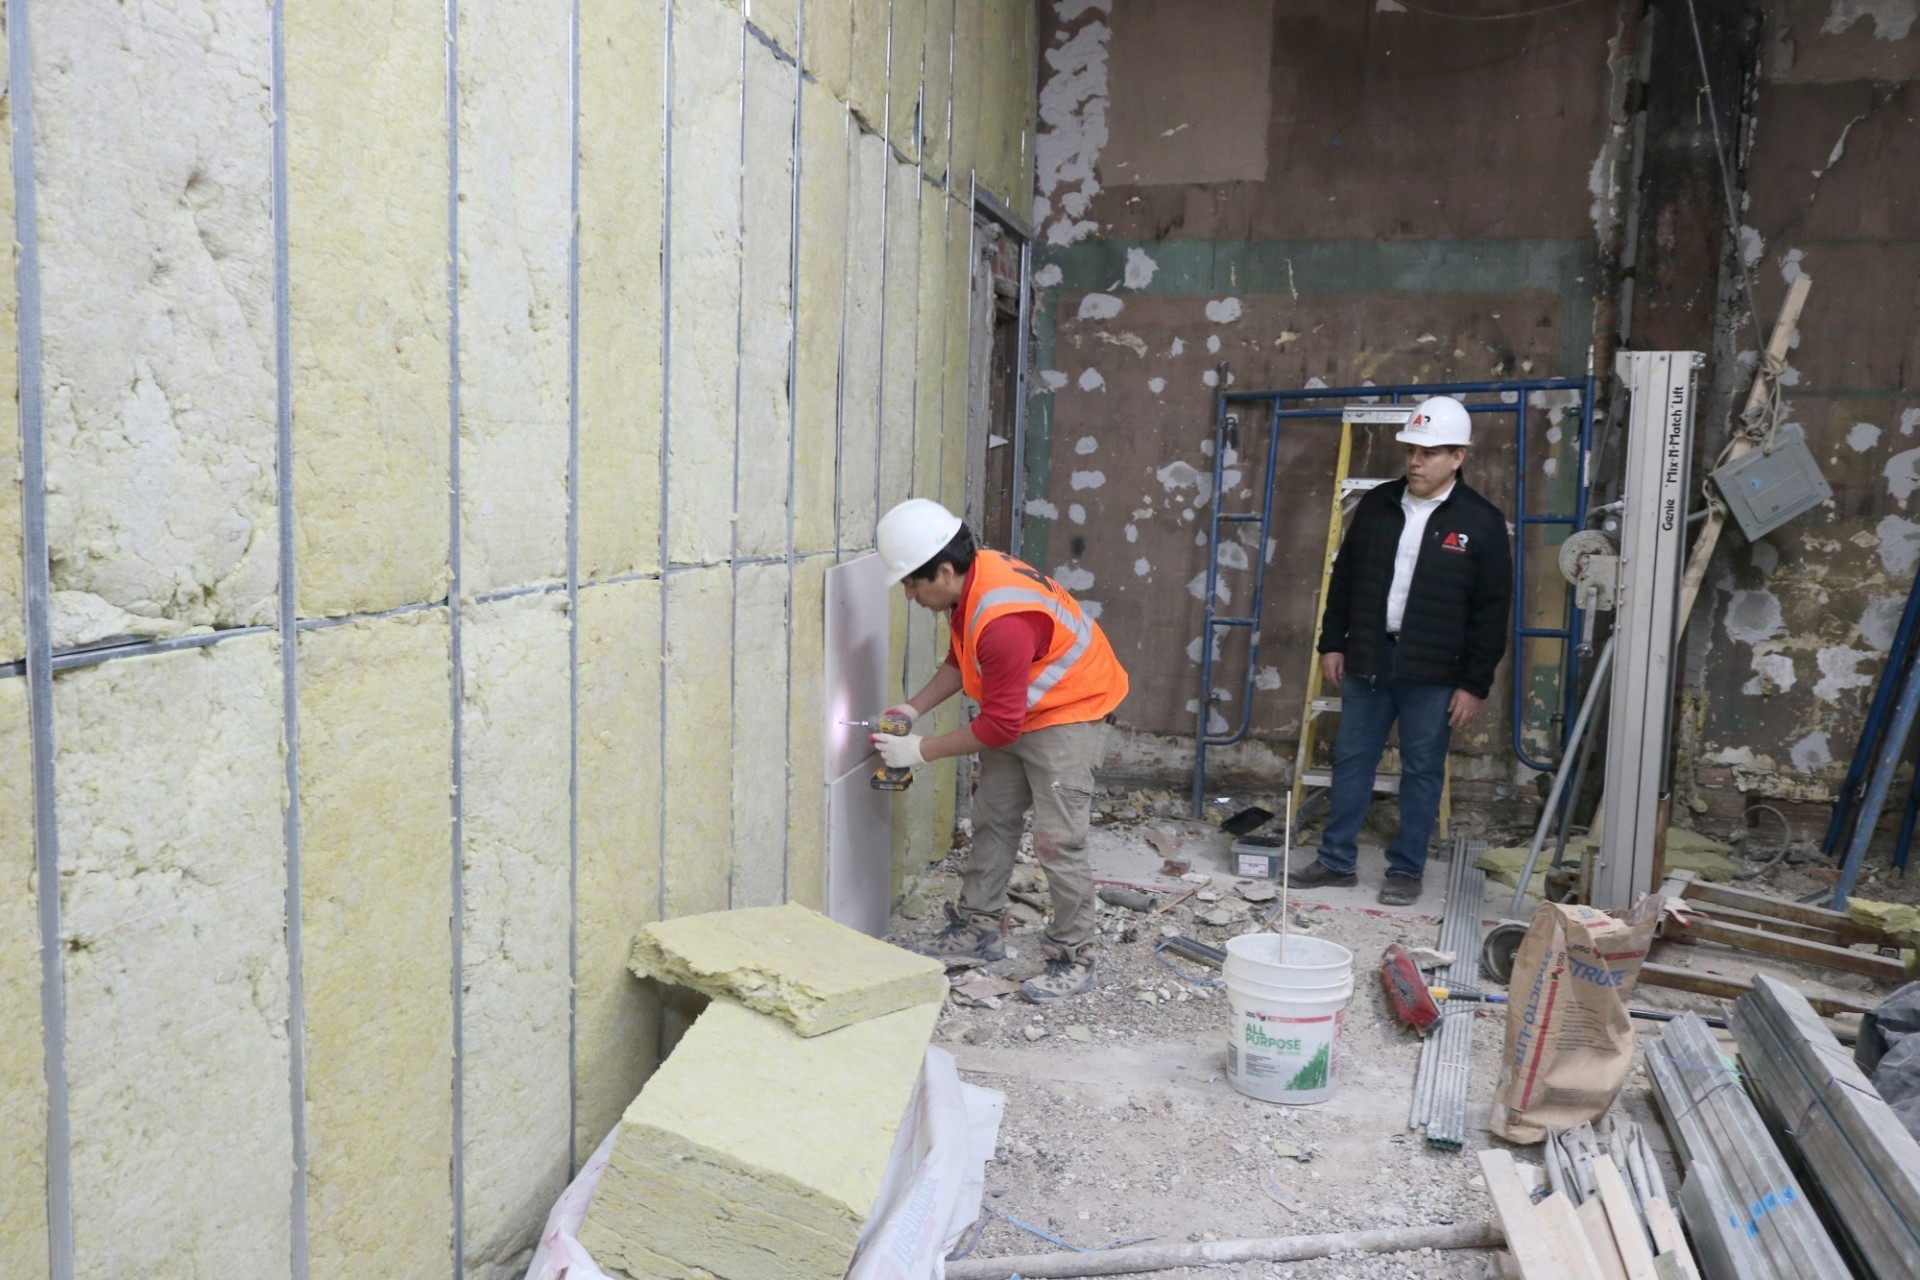 Allan Suarez standing next to a construction worker in a space being renovated, who is installing panels on a wall that is filled with insulation